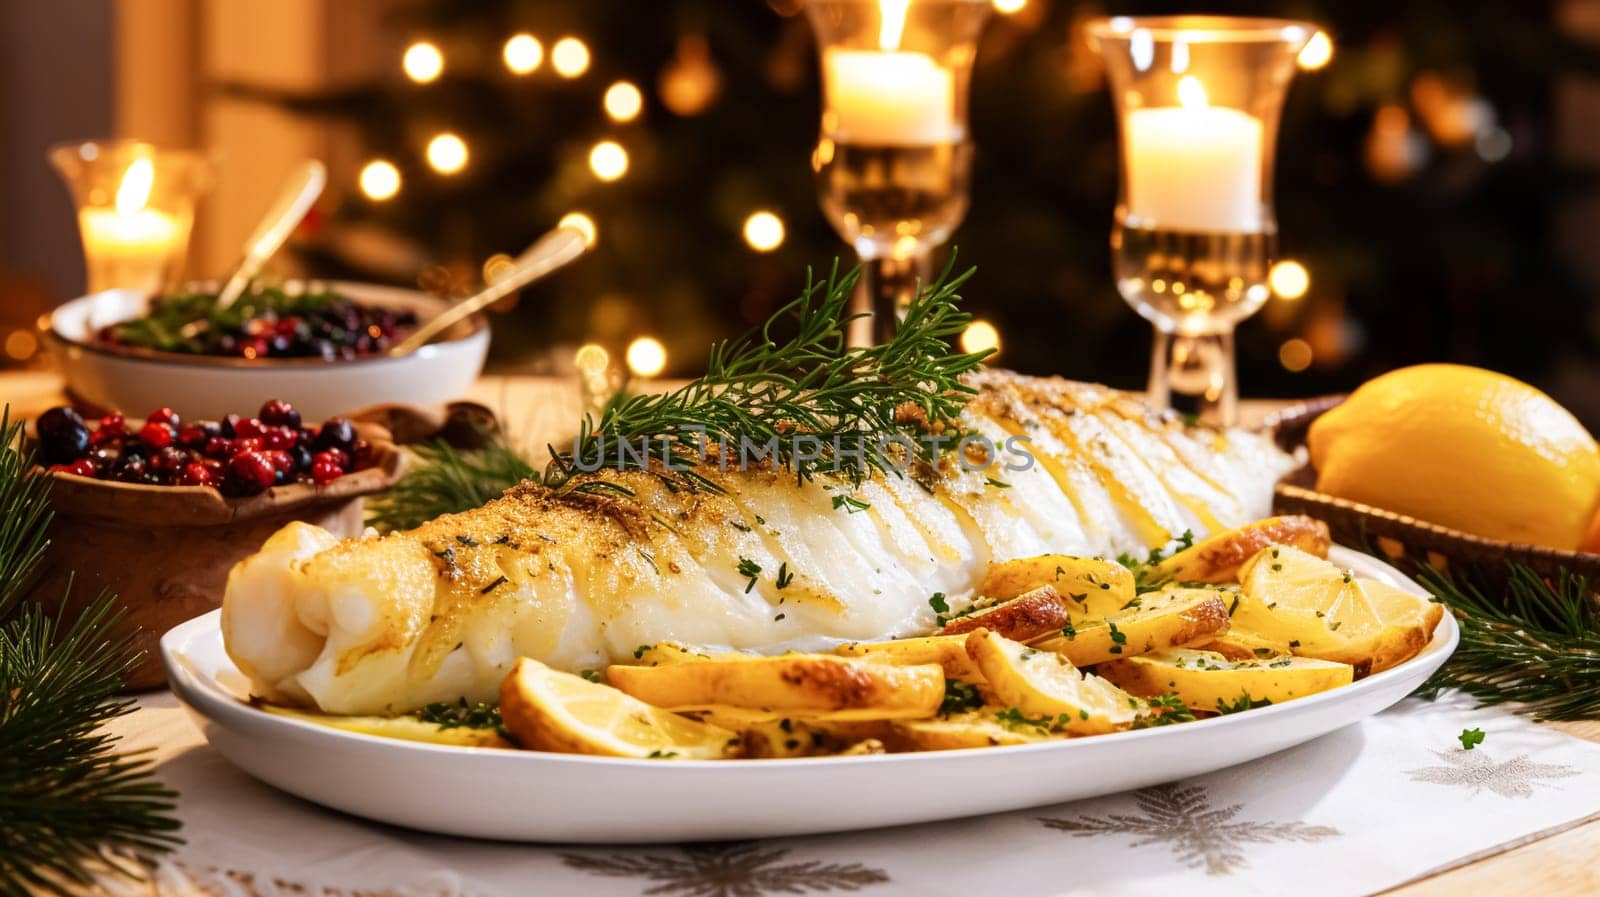 Fish and chips for winter holiday dinner, traditional British cuisine recipe in English country home, holidays celebration and homemade food inspiration